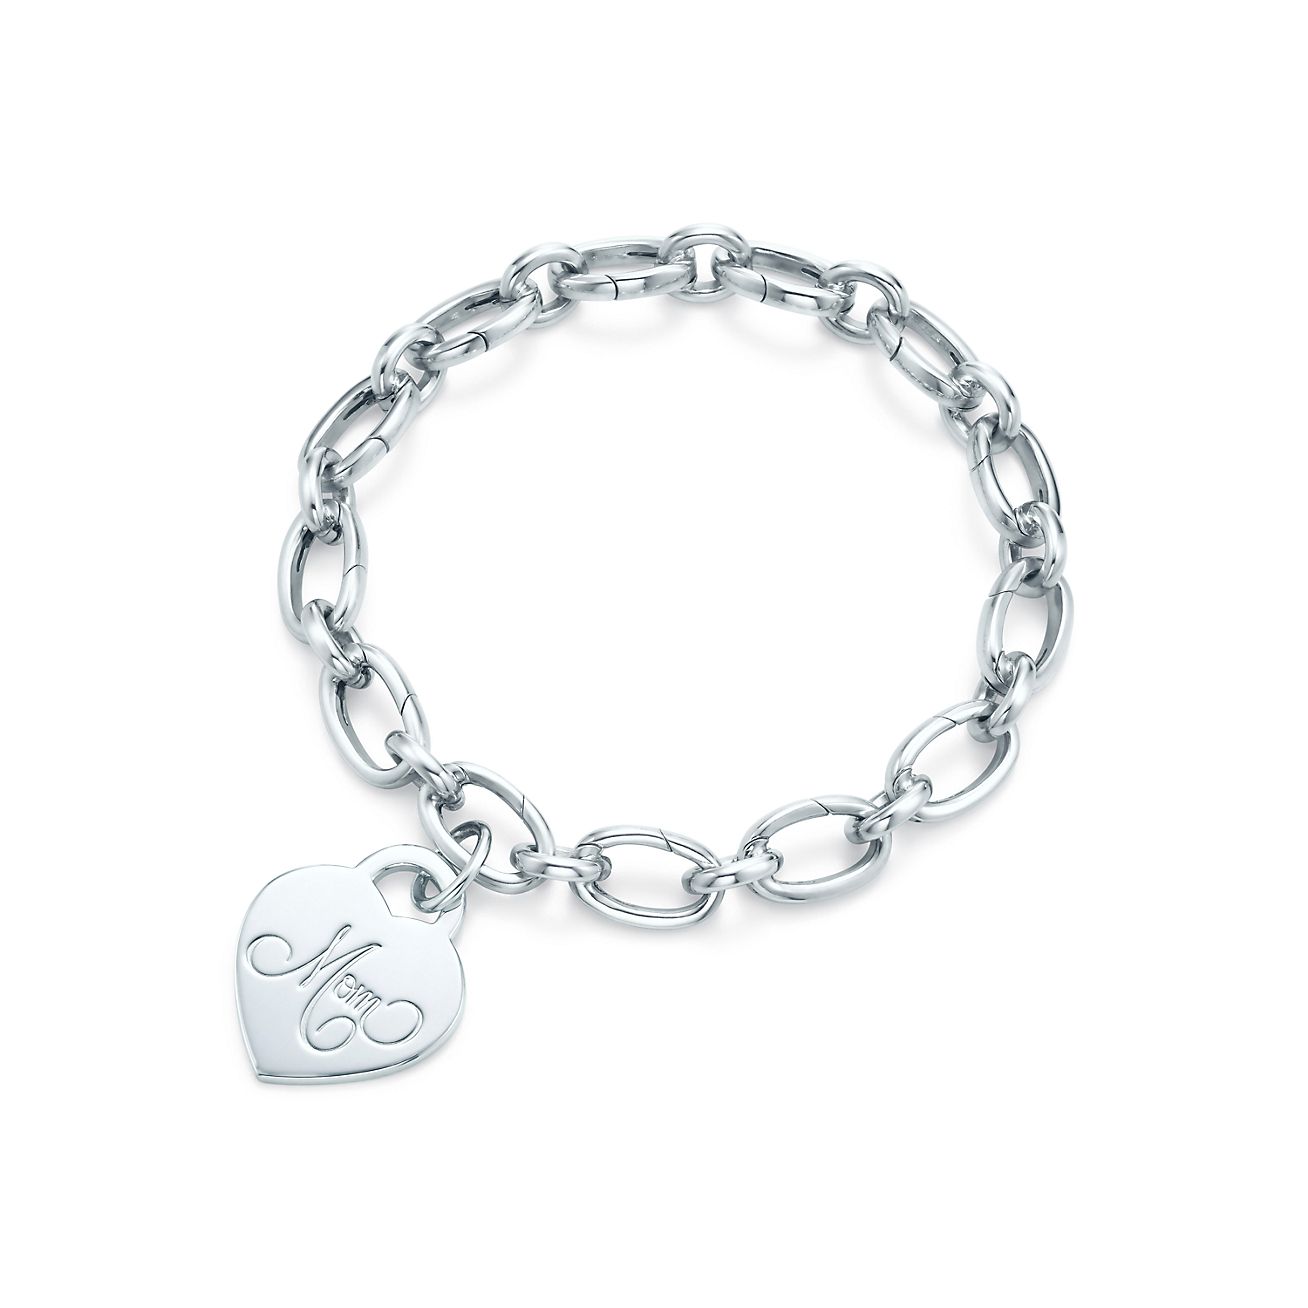 Mom heart tag charm in sterling silver 